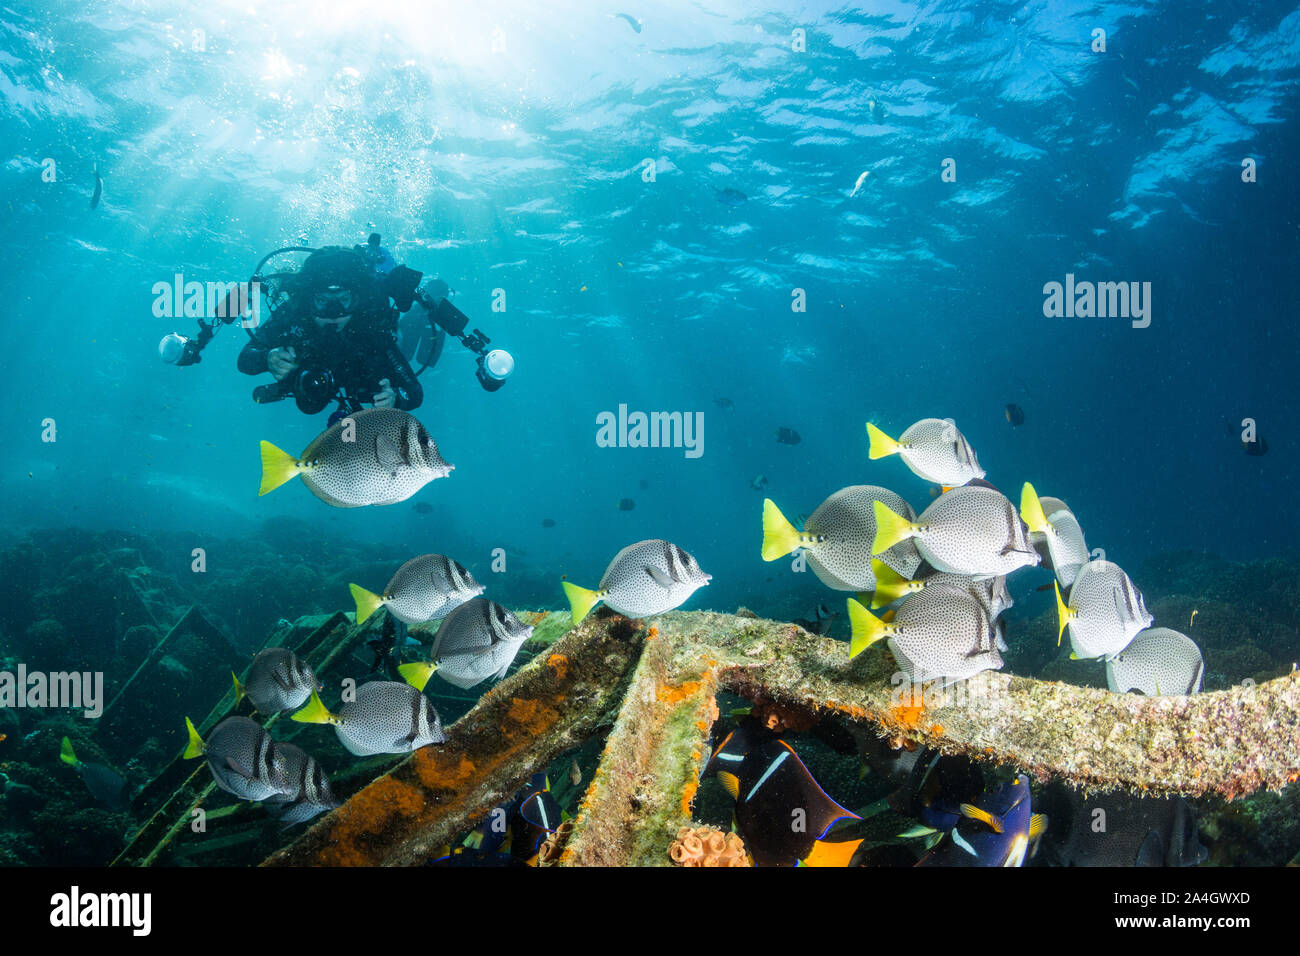 A scuba diver with underwater camera watches a school of Yellowtail Surgeonfish at a dive site named San Rafaelito in La Paz. Stock Photo